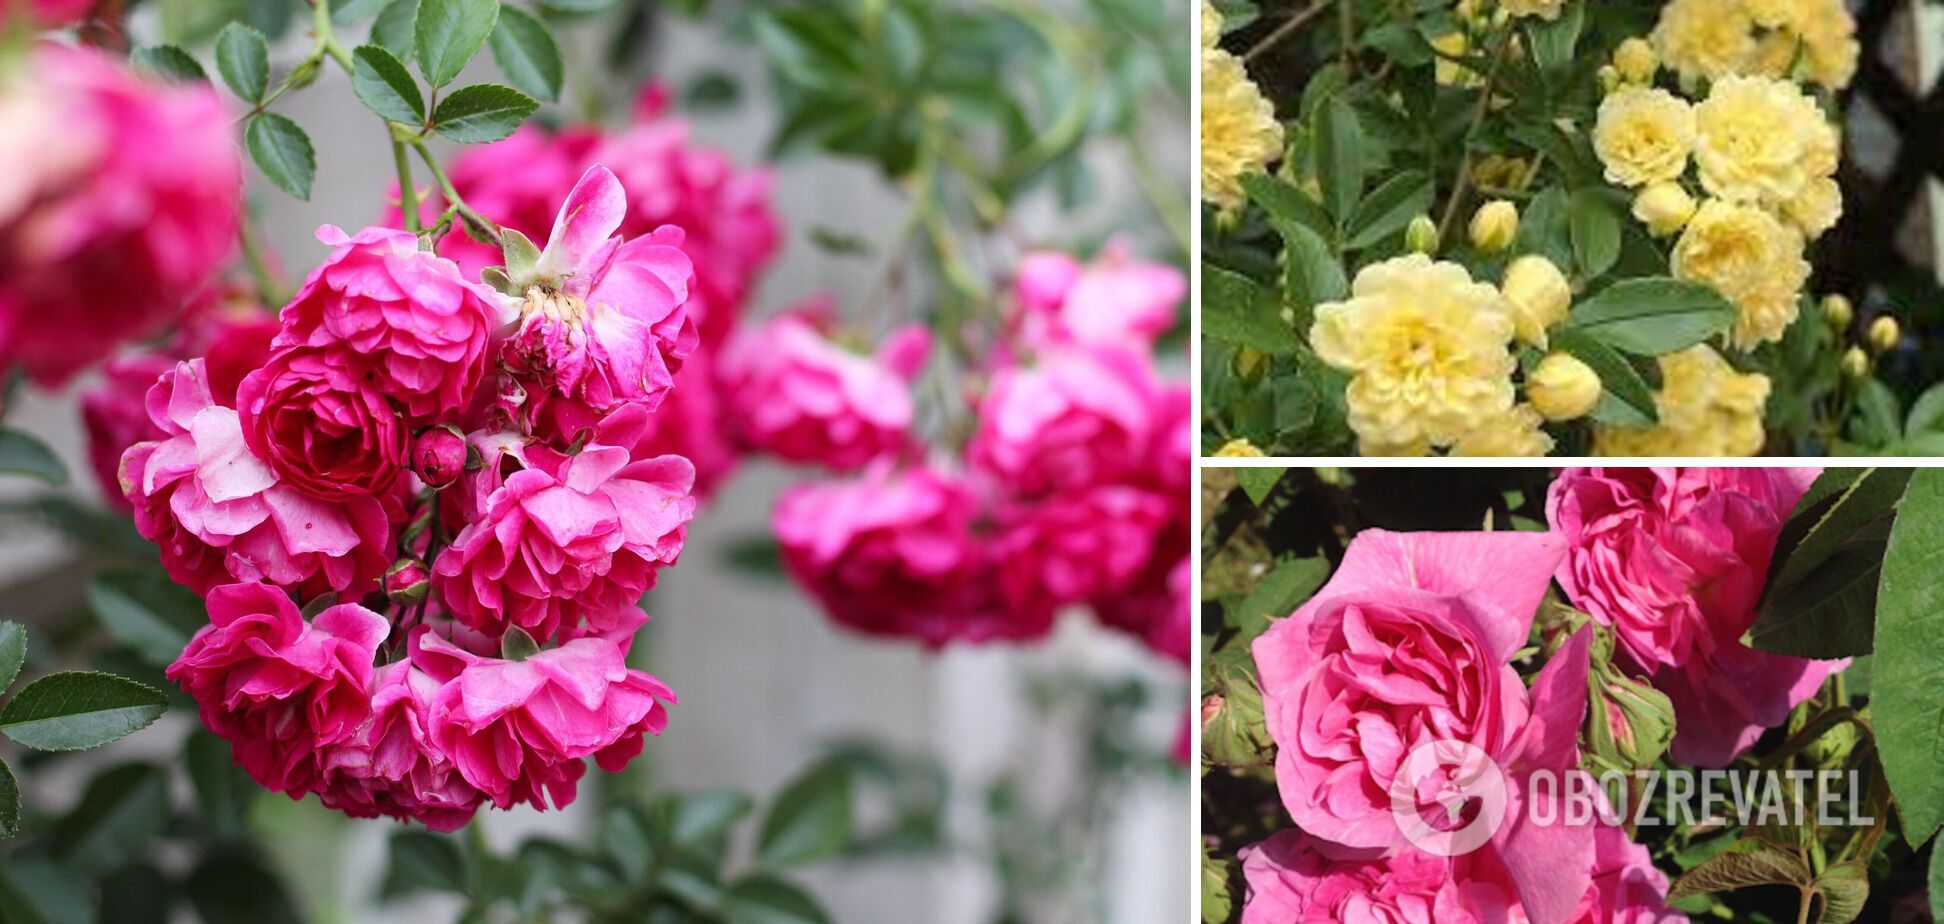 One mistake and the flowers are gone: what to do with rose bushes in February